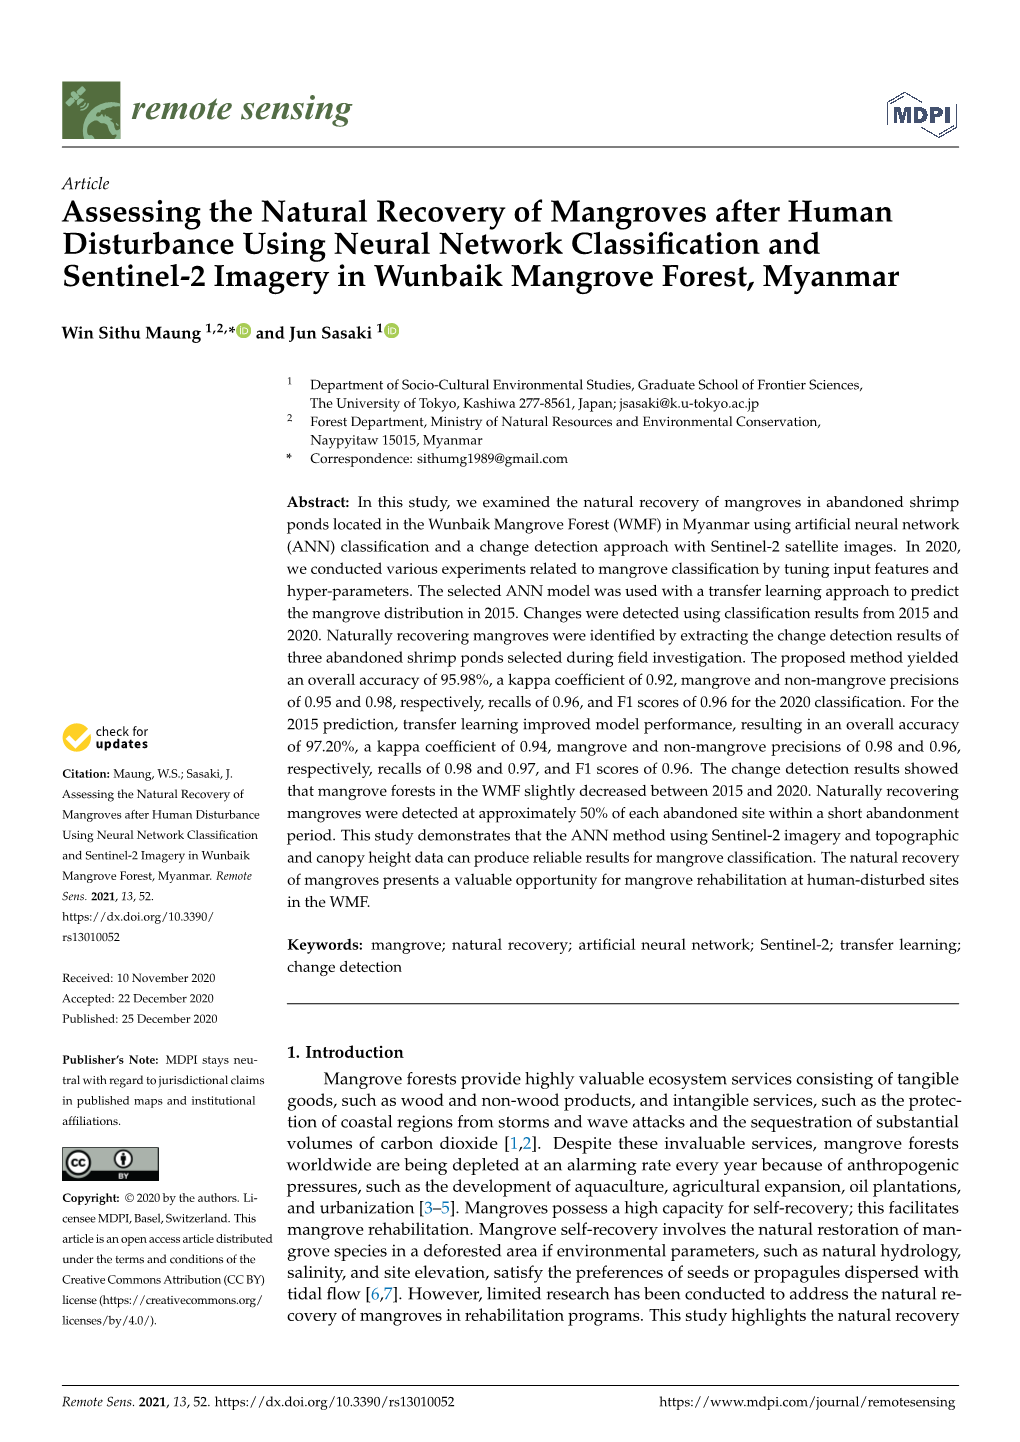 Assessing the Natural Recovery of Mangroves After Human Disturbance Using Neural Network Classiﬁcation and Sentinel-2 Imagery in Wunbaik Mangrove Forest, Myanmar